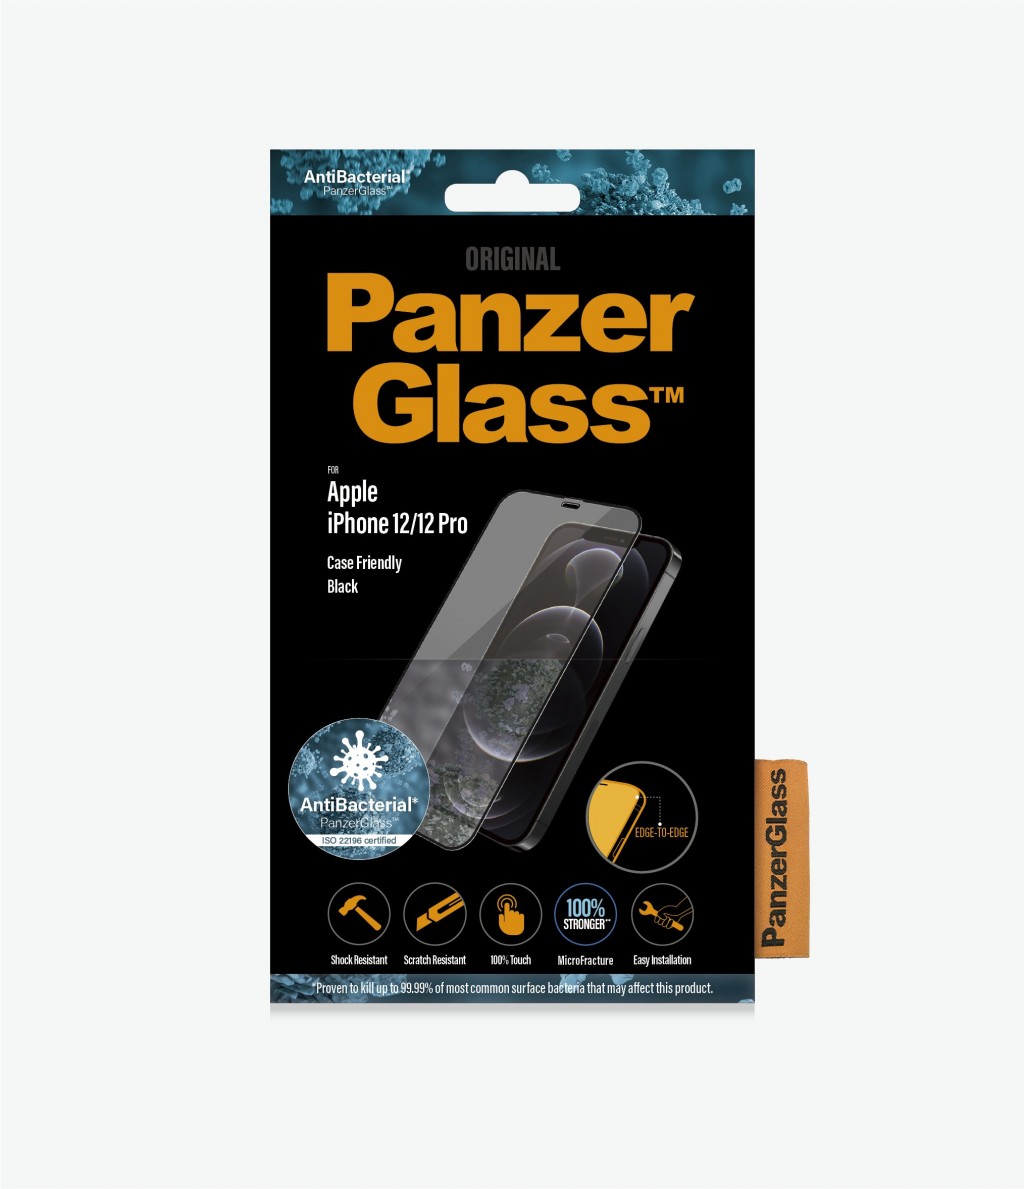 PanzerGlass | Apple | For iPhone 12/12 Pro | Glass | Black | 100% touch; The coating is non-toxic | Case Friendly